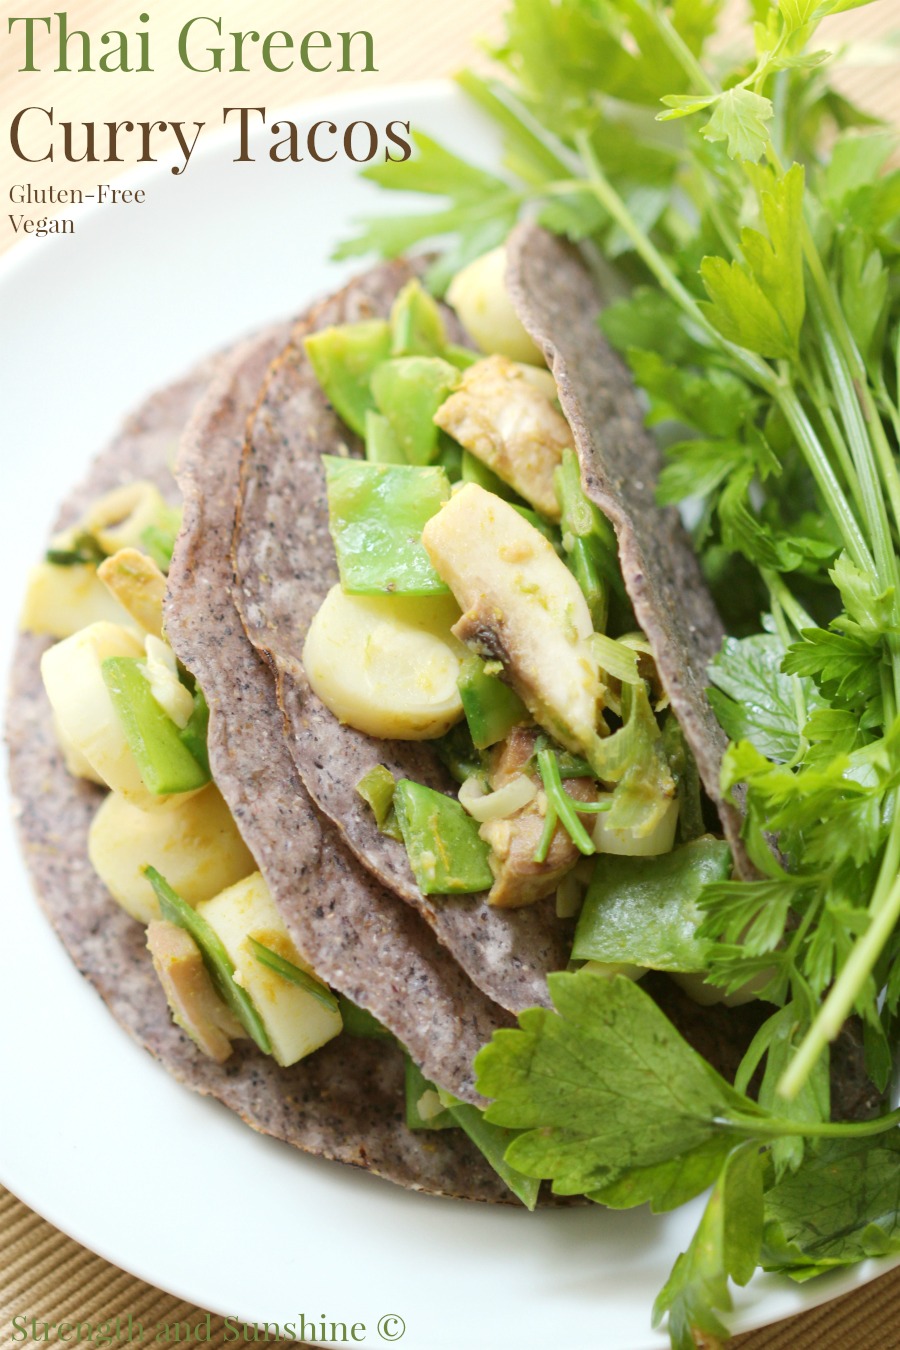 Thai Green Curry Tacos | Strength and Sunshine @RebeccaGF666 A new twist on tacos! Thai Green Curry Tacos are a fabulous Asian/Mexican fusion recipe to try. Gluten-free, vegan, and allergy-friendly, these tacos will make for a delicious and healthy dinner or lunch!